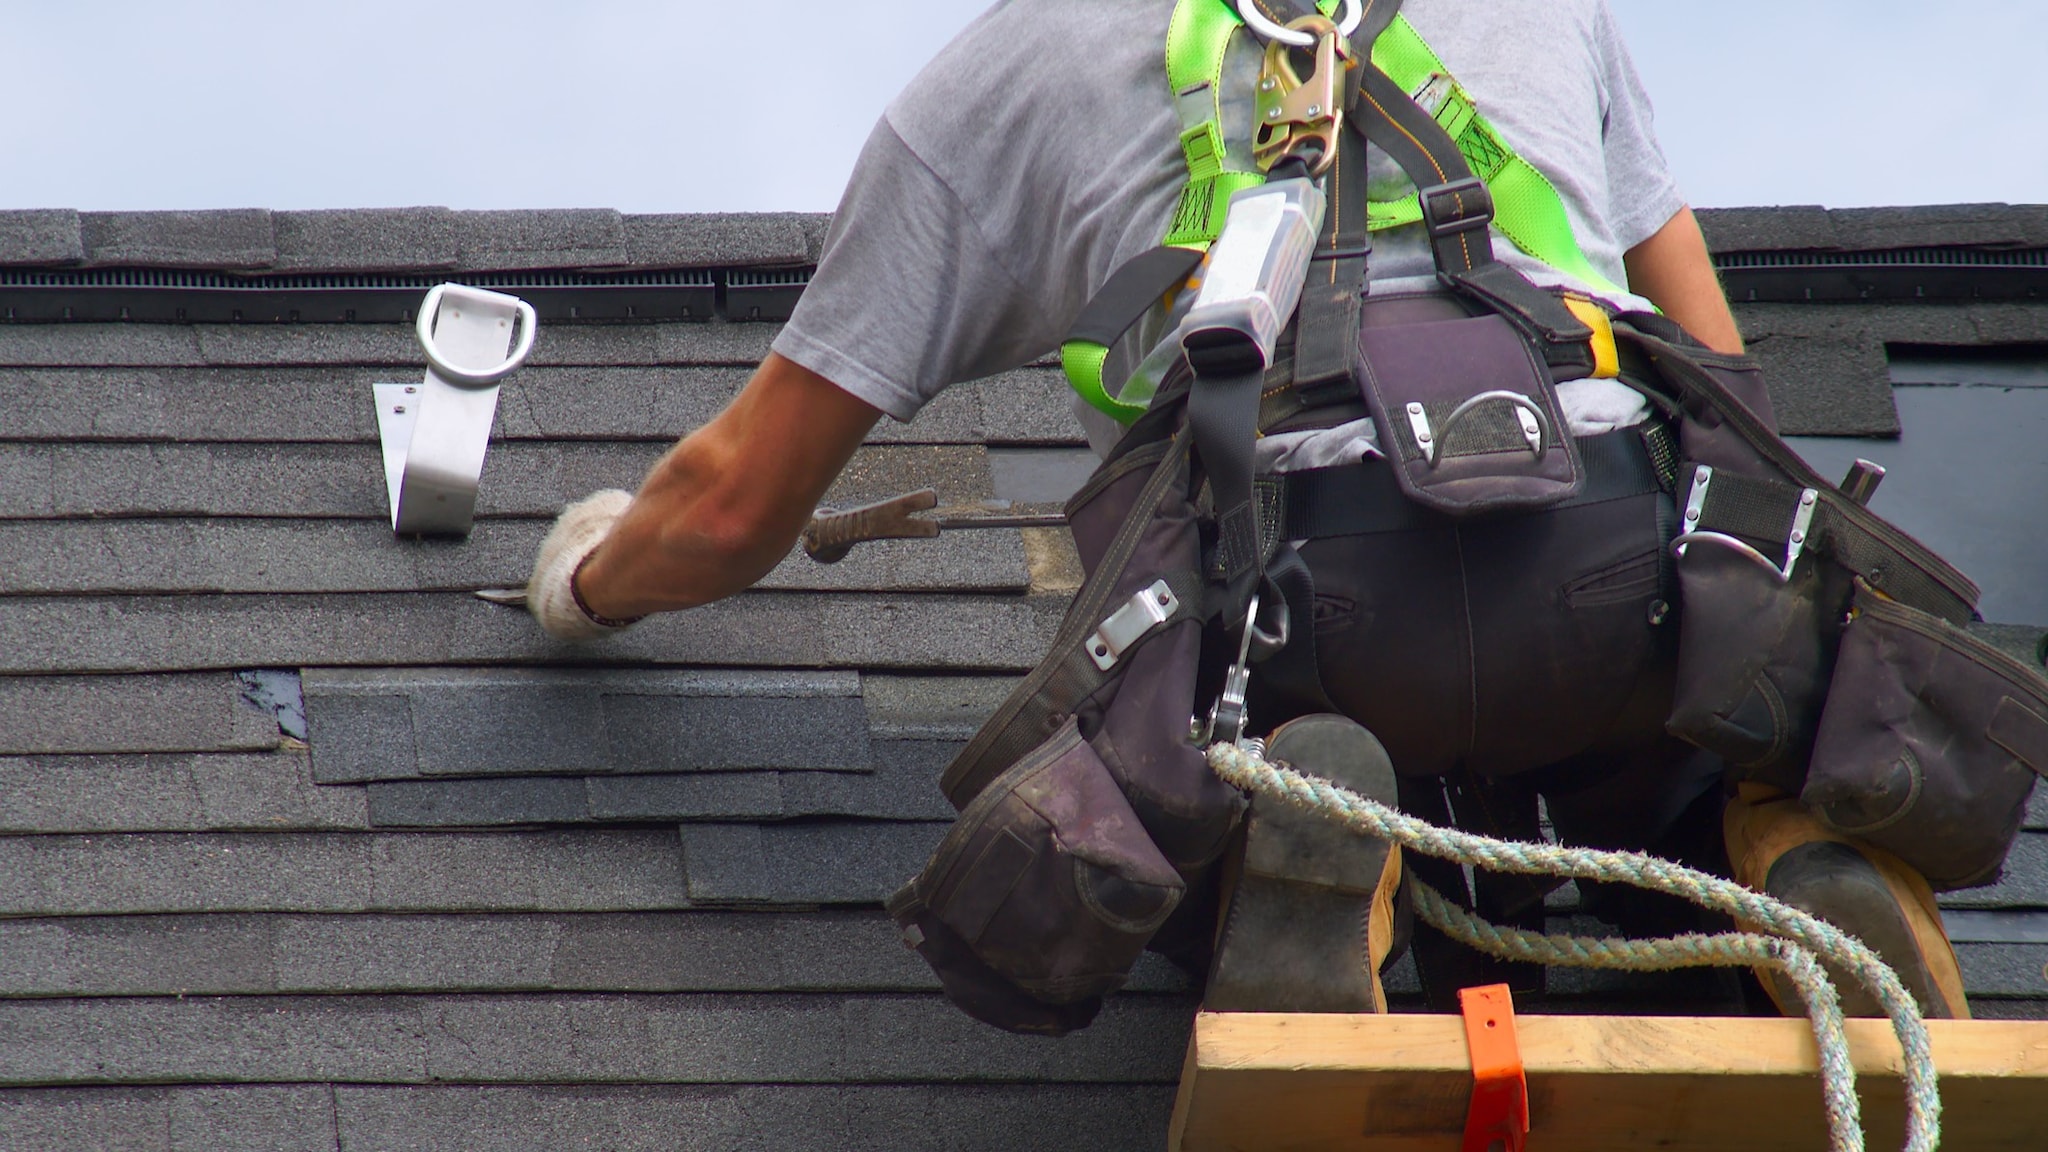 A man is on a roof working on shingles. Photo credit Getty images/jacquesdurocher.